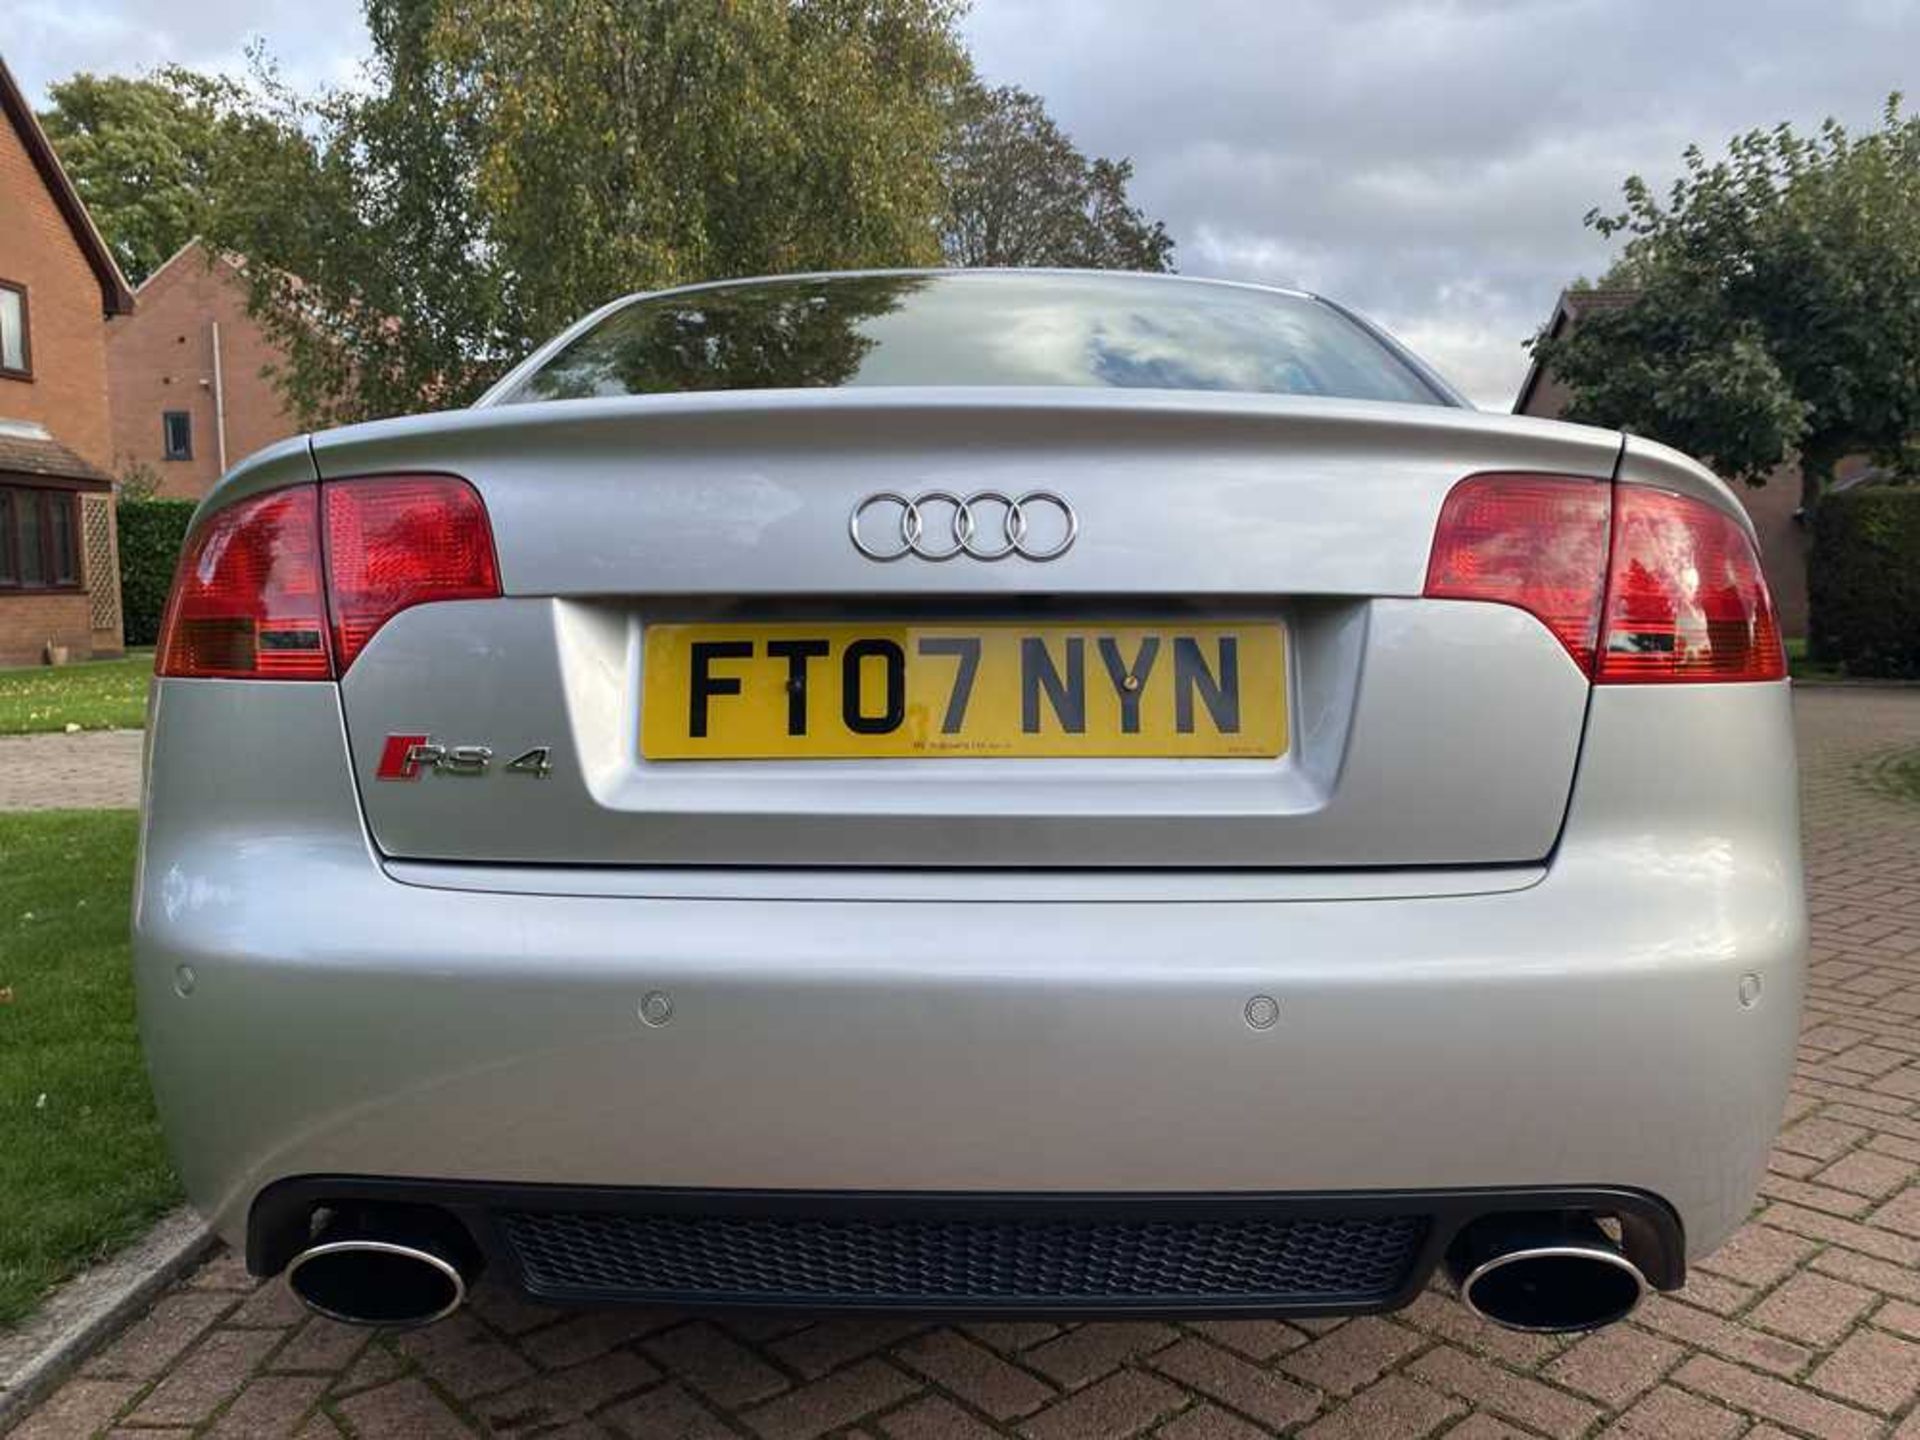 2007 Audi RS4 Saloon One owner and just c.60,000 miles from new - Image 17 of 86